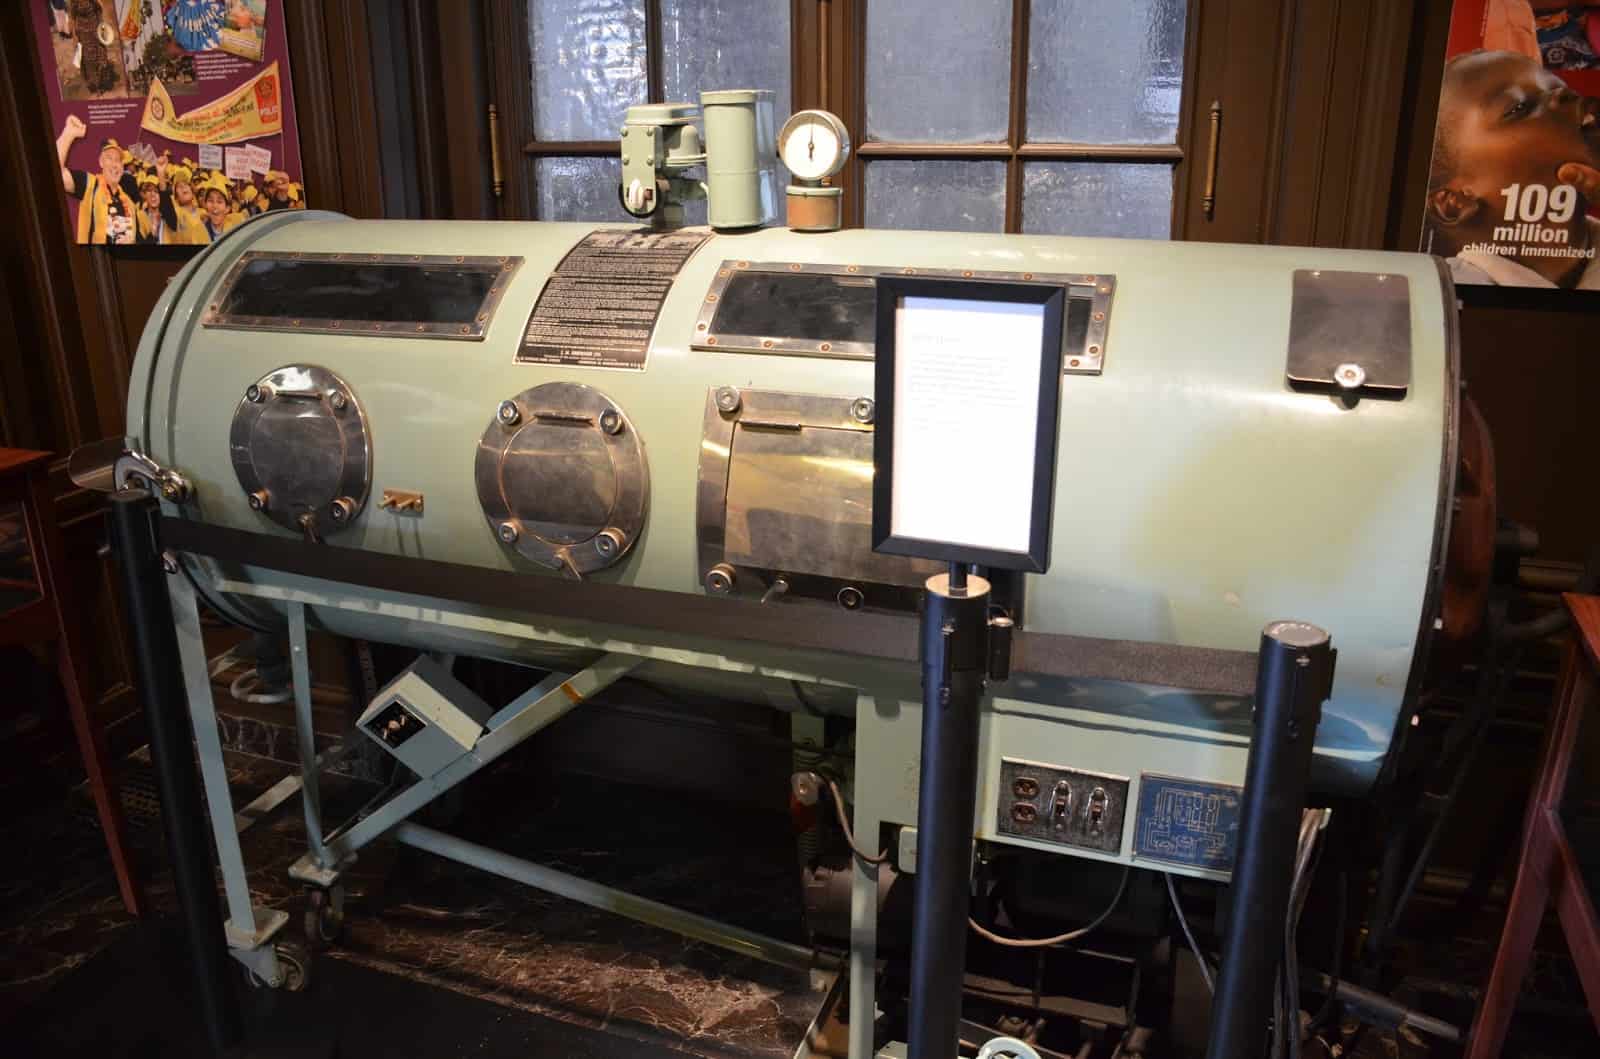 Iron Lung at the International Museum of Surgical Science, Gold Coast Chicago